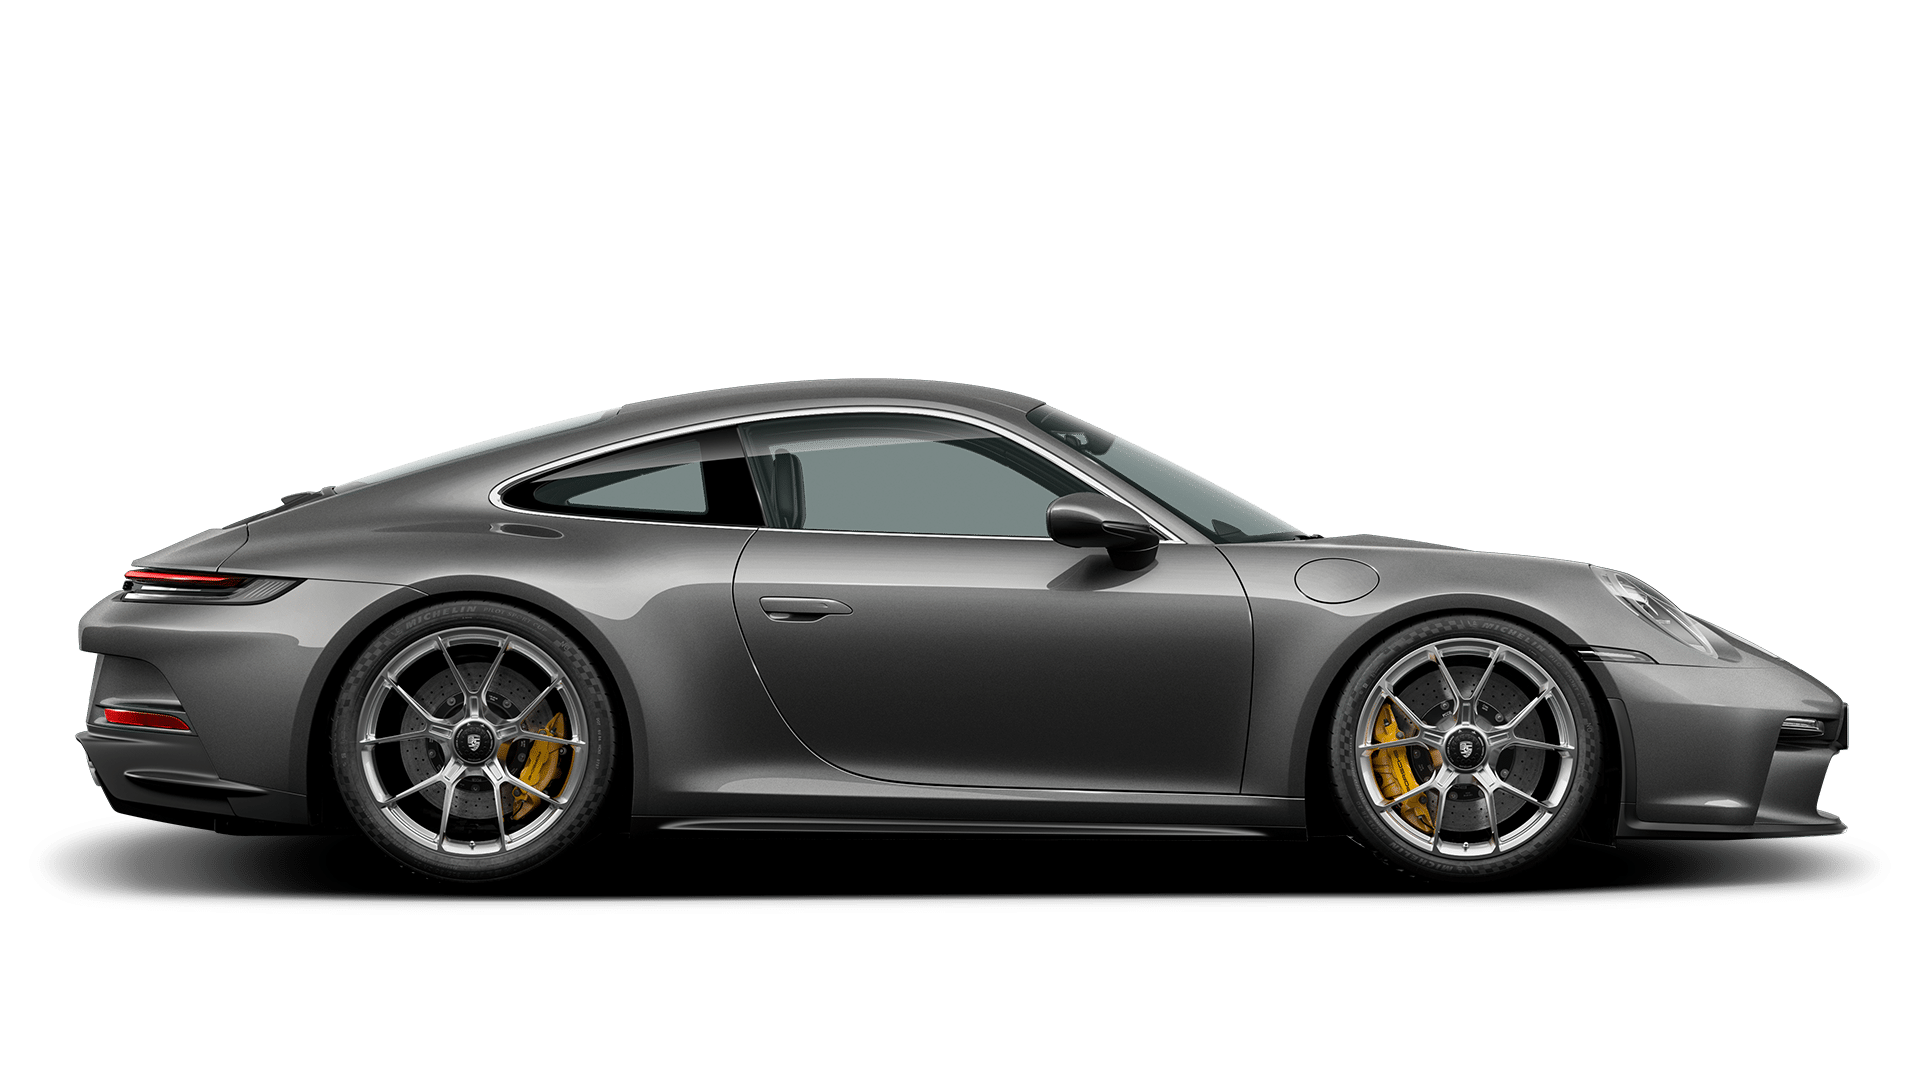 Faulty CHMSLs caused the recall of certain Porsche 911 GT3 Touring models